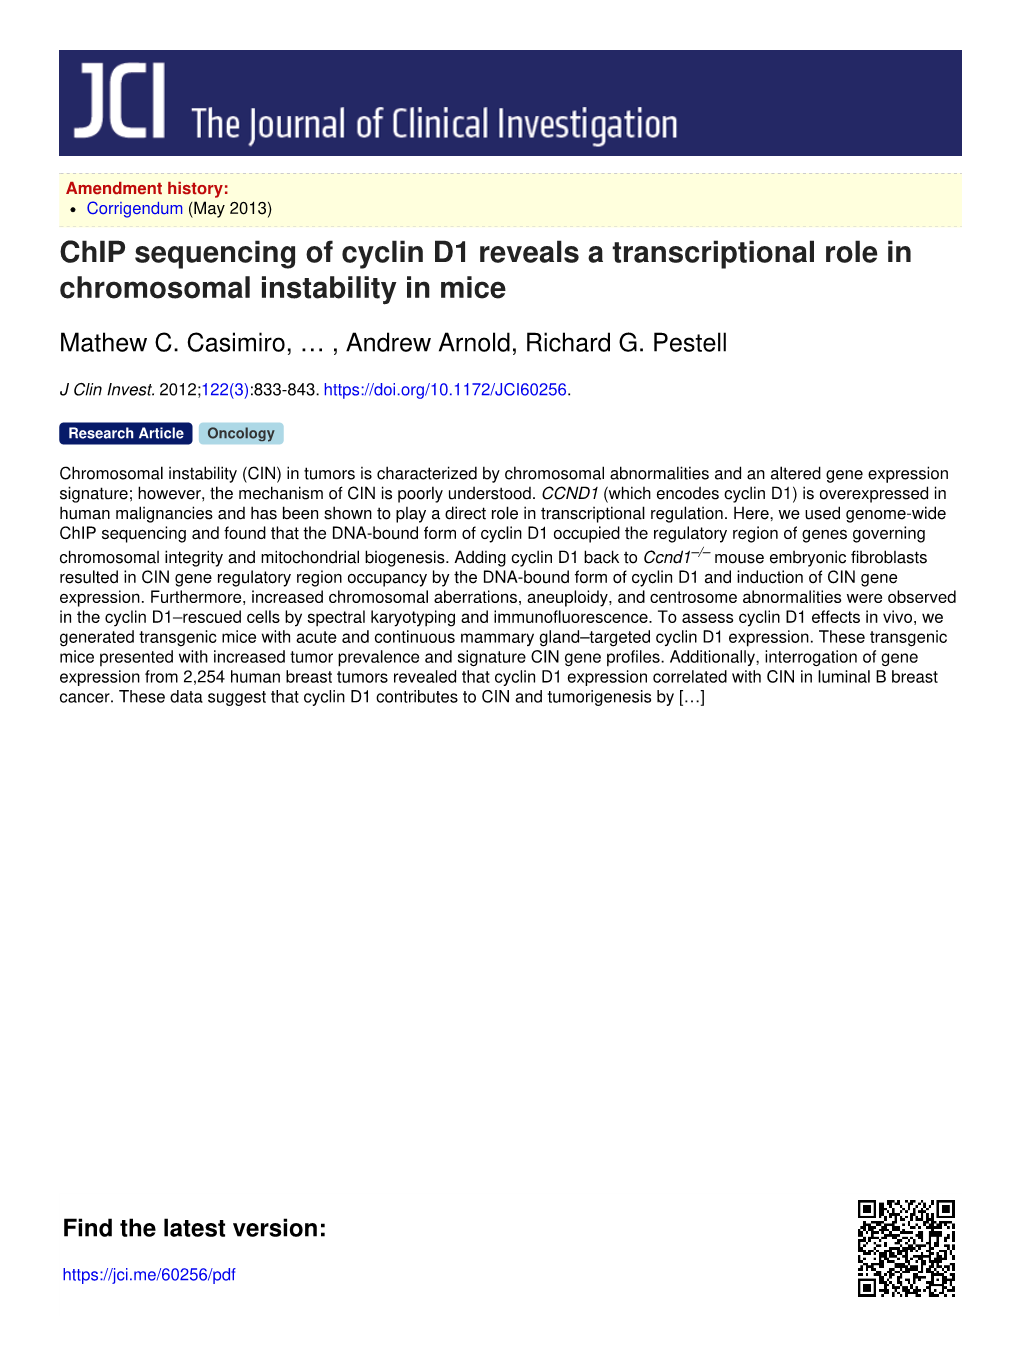 Chip Sequencing of Cyclin D1 Reveals a Transcriptional Role in Chromosomal Instability in Mice